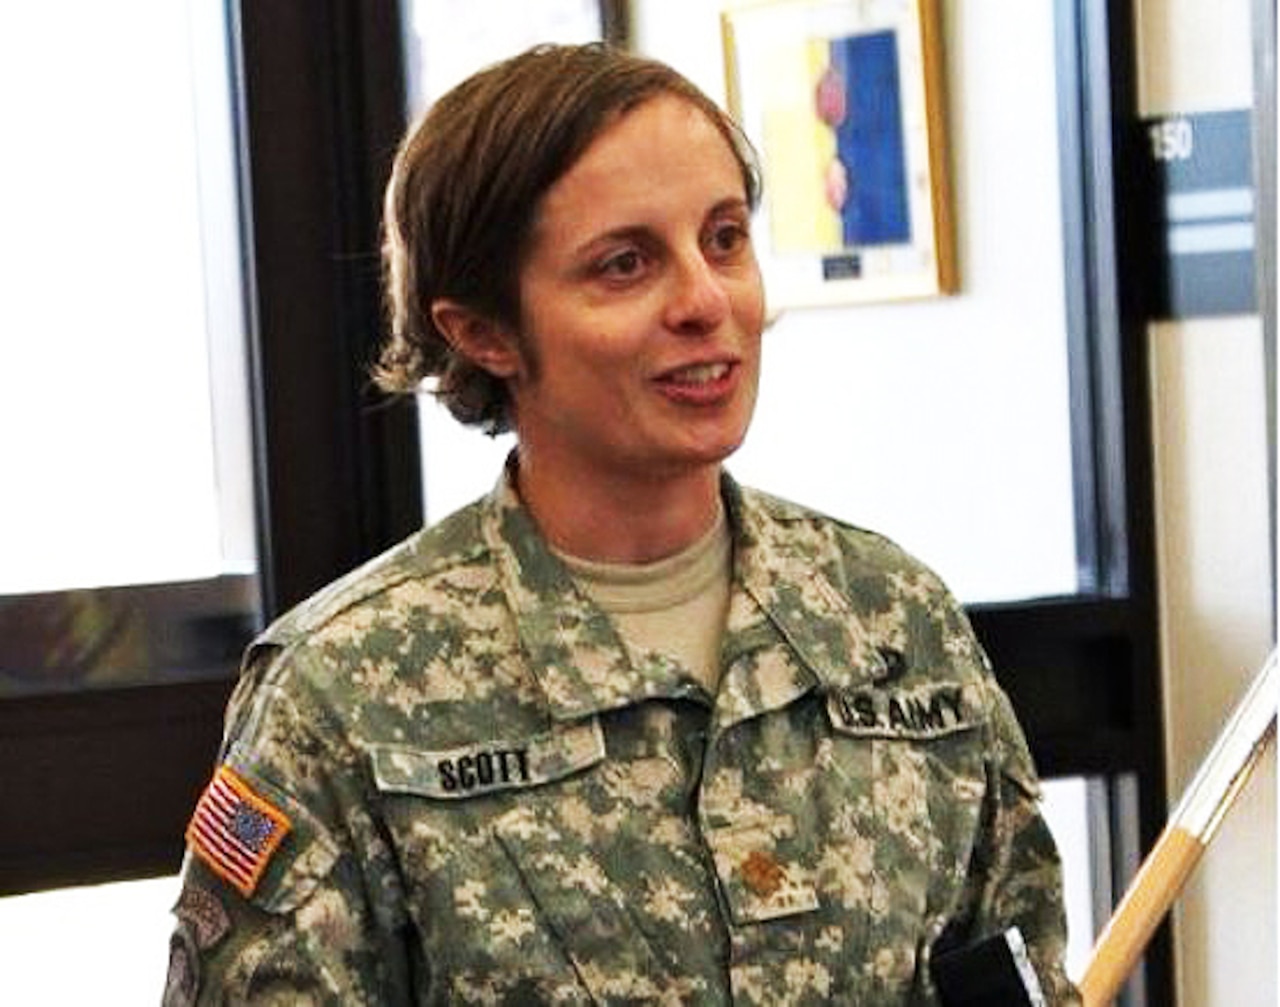 Army Maj. Angela Scott from the 20th Chemical, Biological, Radiological, Nuclear and Explosives Command based at Aberdeen Proving Ground, Md., was one of 26 women to take part in the second gender-integrated Ranger Training Assessment Course. U.S. Army photo